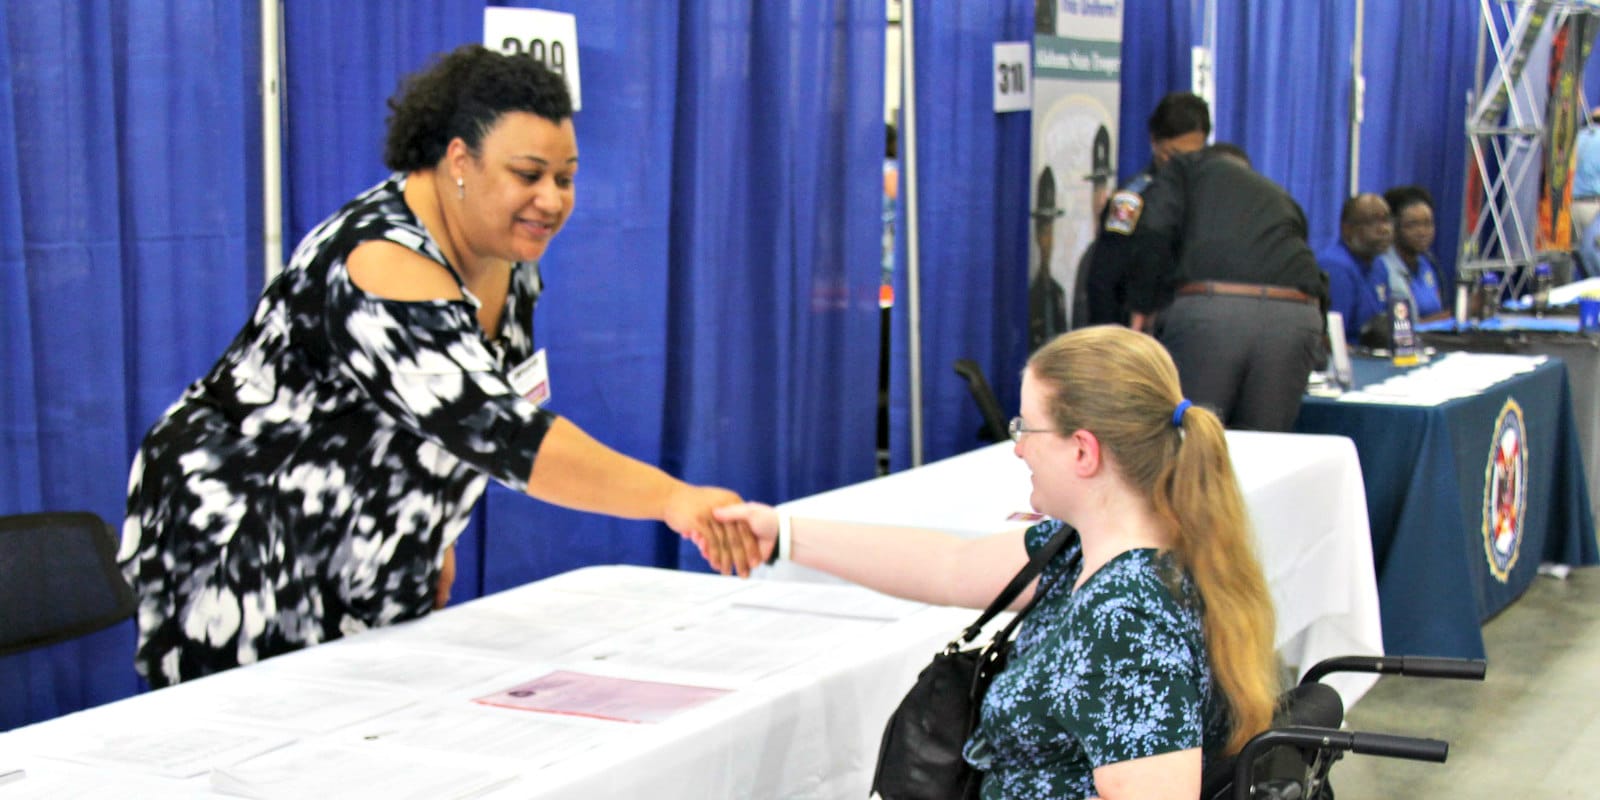 Alabama Department of Rehabilitation Services working with a participant in a wheelchair at a job fair